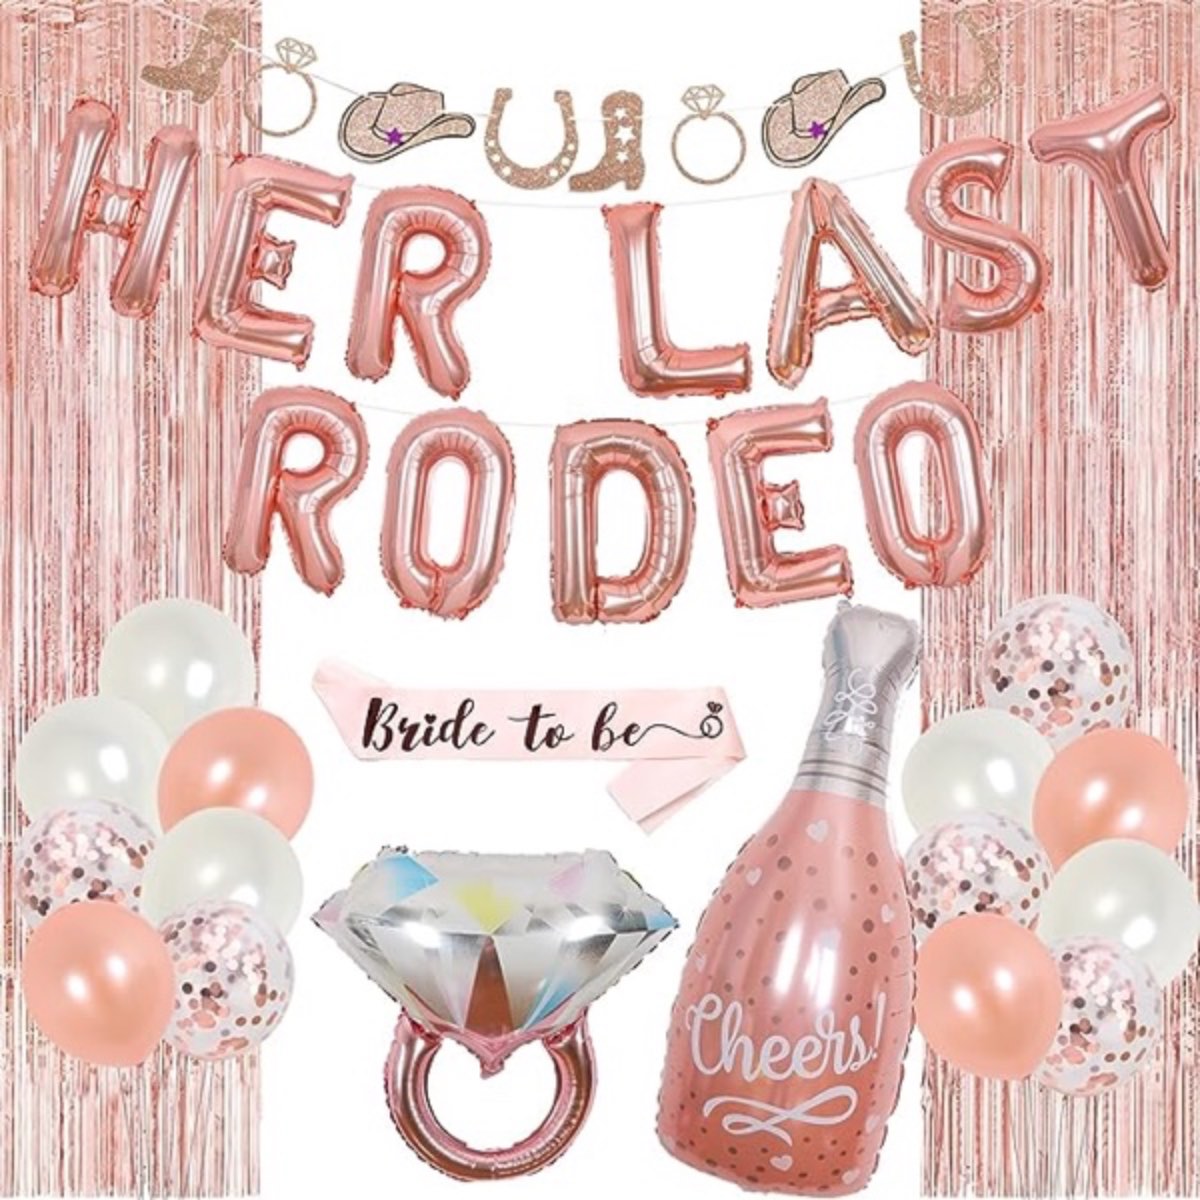 How to Throw a Last Rodeo Bachelorette Party - The Ultimate Guide - Decorations - Supplies